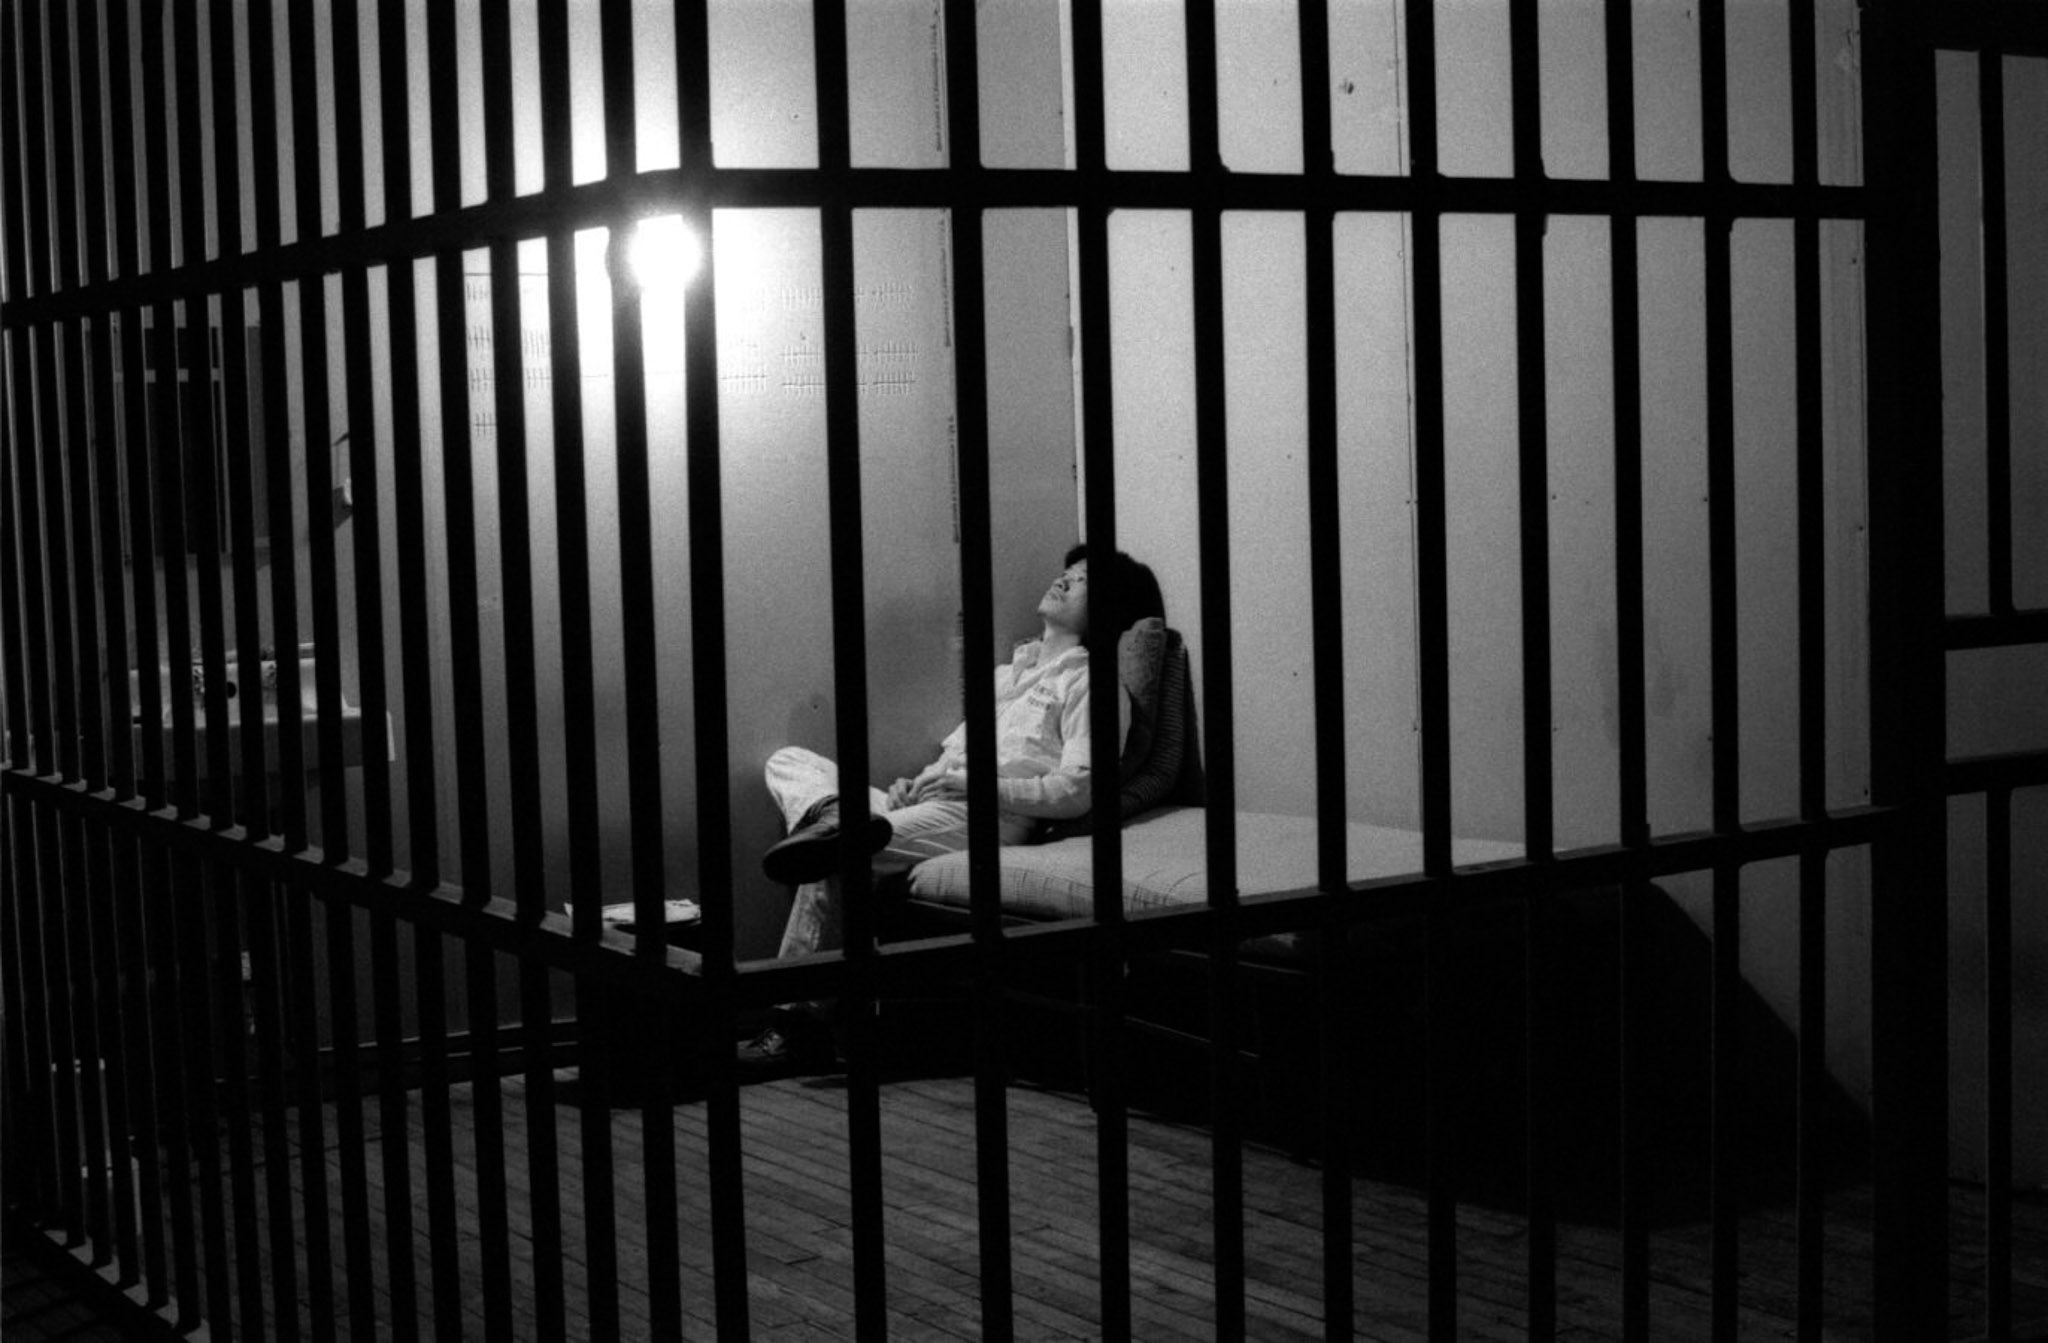 A black and white photograph of a person sitting in a jail cell. 